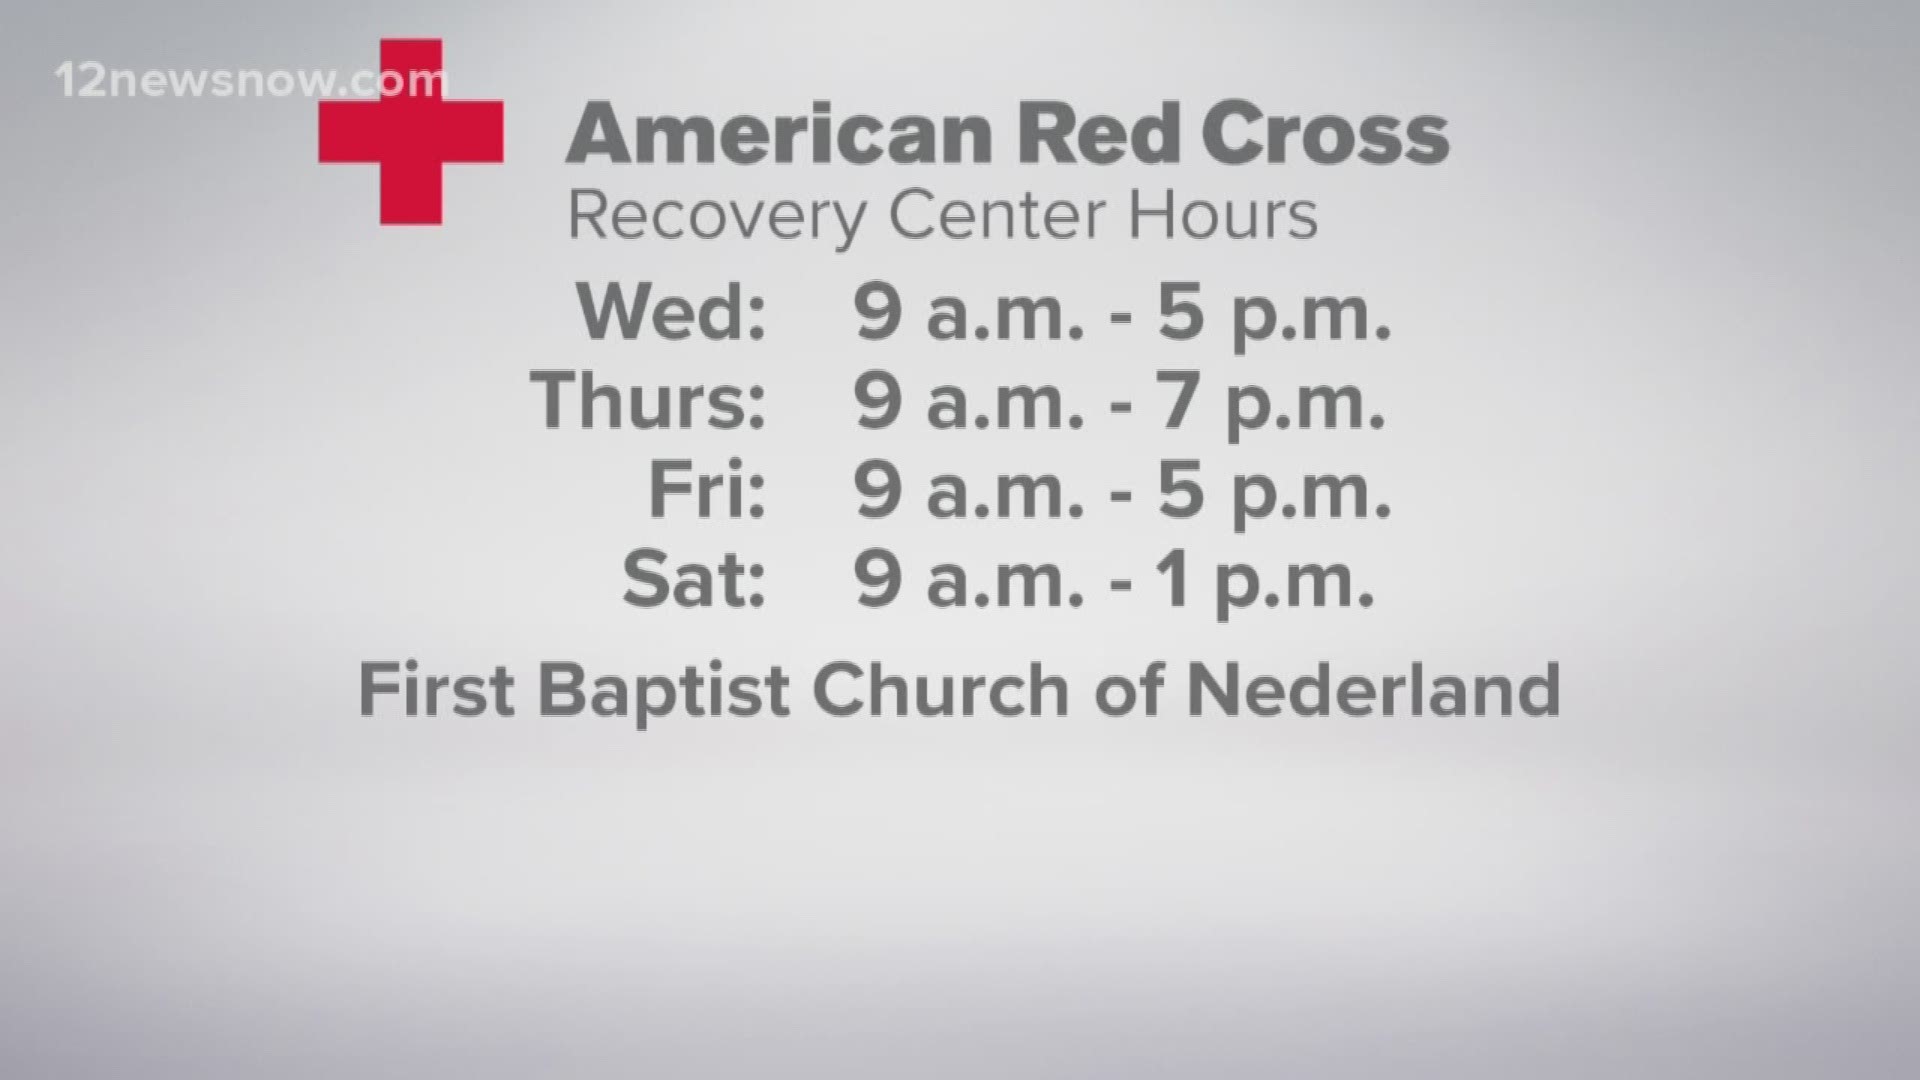 The Red Cross location is at the First Baptist Church in Nederland. The location will be available until 1 p.m. Saturday, Dec. 7.